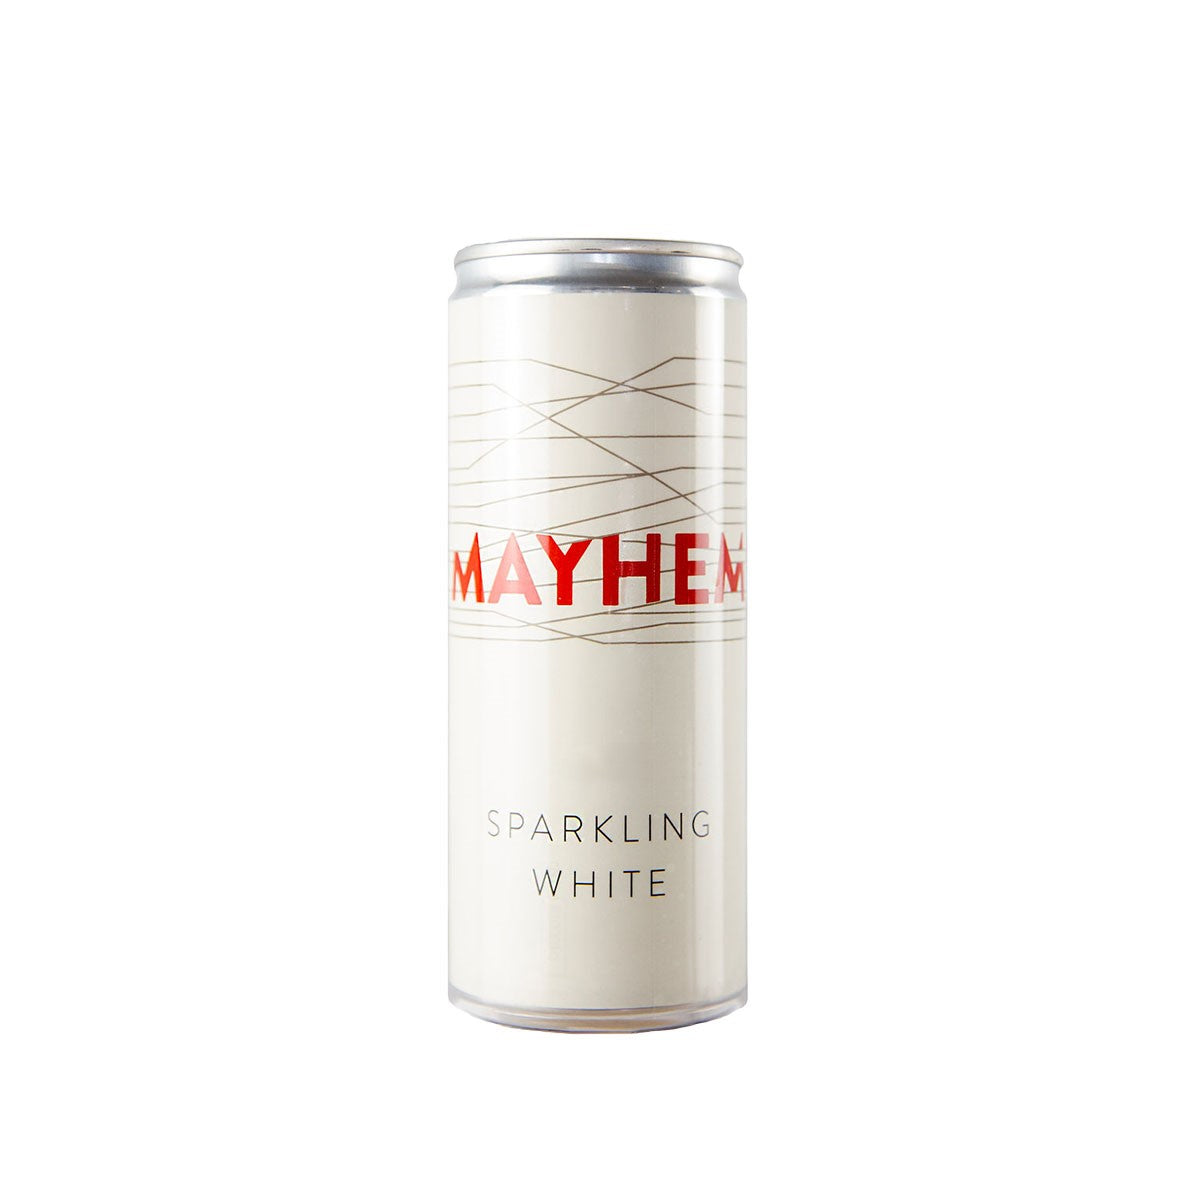 2023 Sparkling White (12-pack cans)